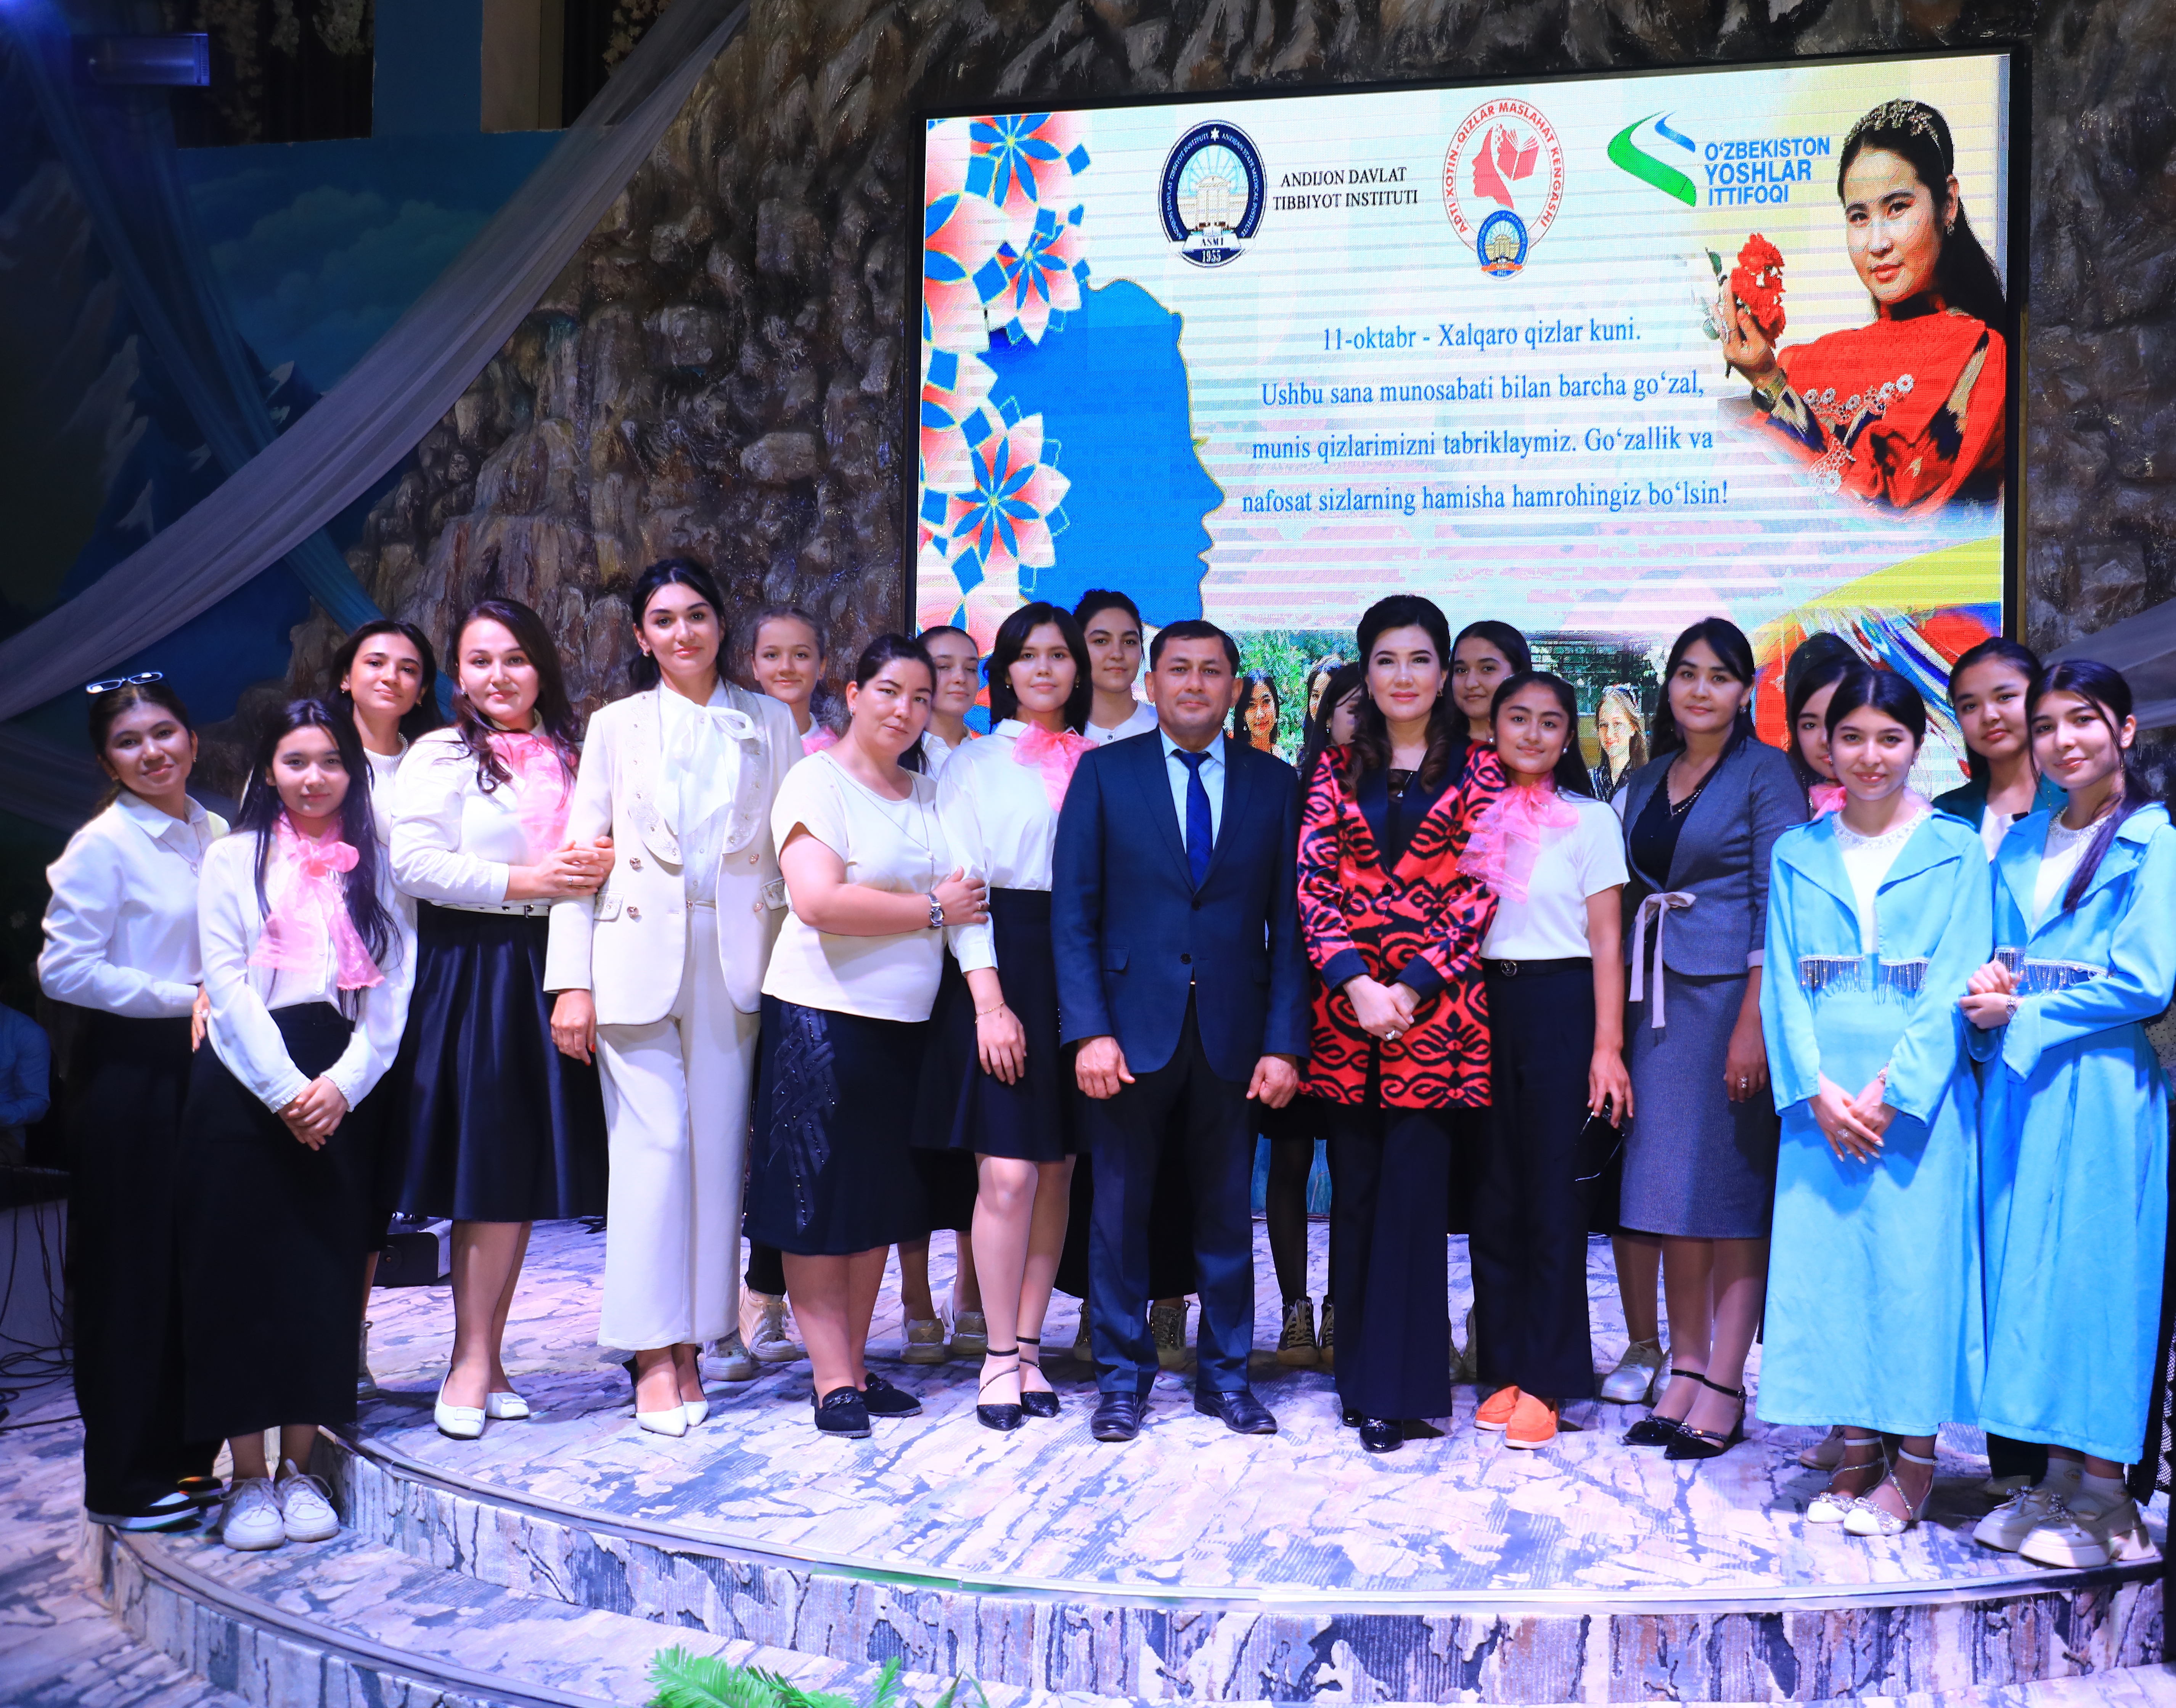 A SOLEMN CEREMONY HAS BEEN HELD ON THE OCCASION OF THE INTERNATIONAL GIRL’S DAY